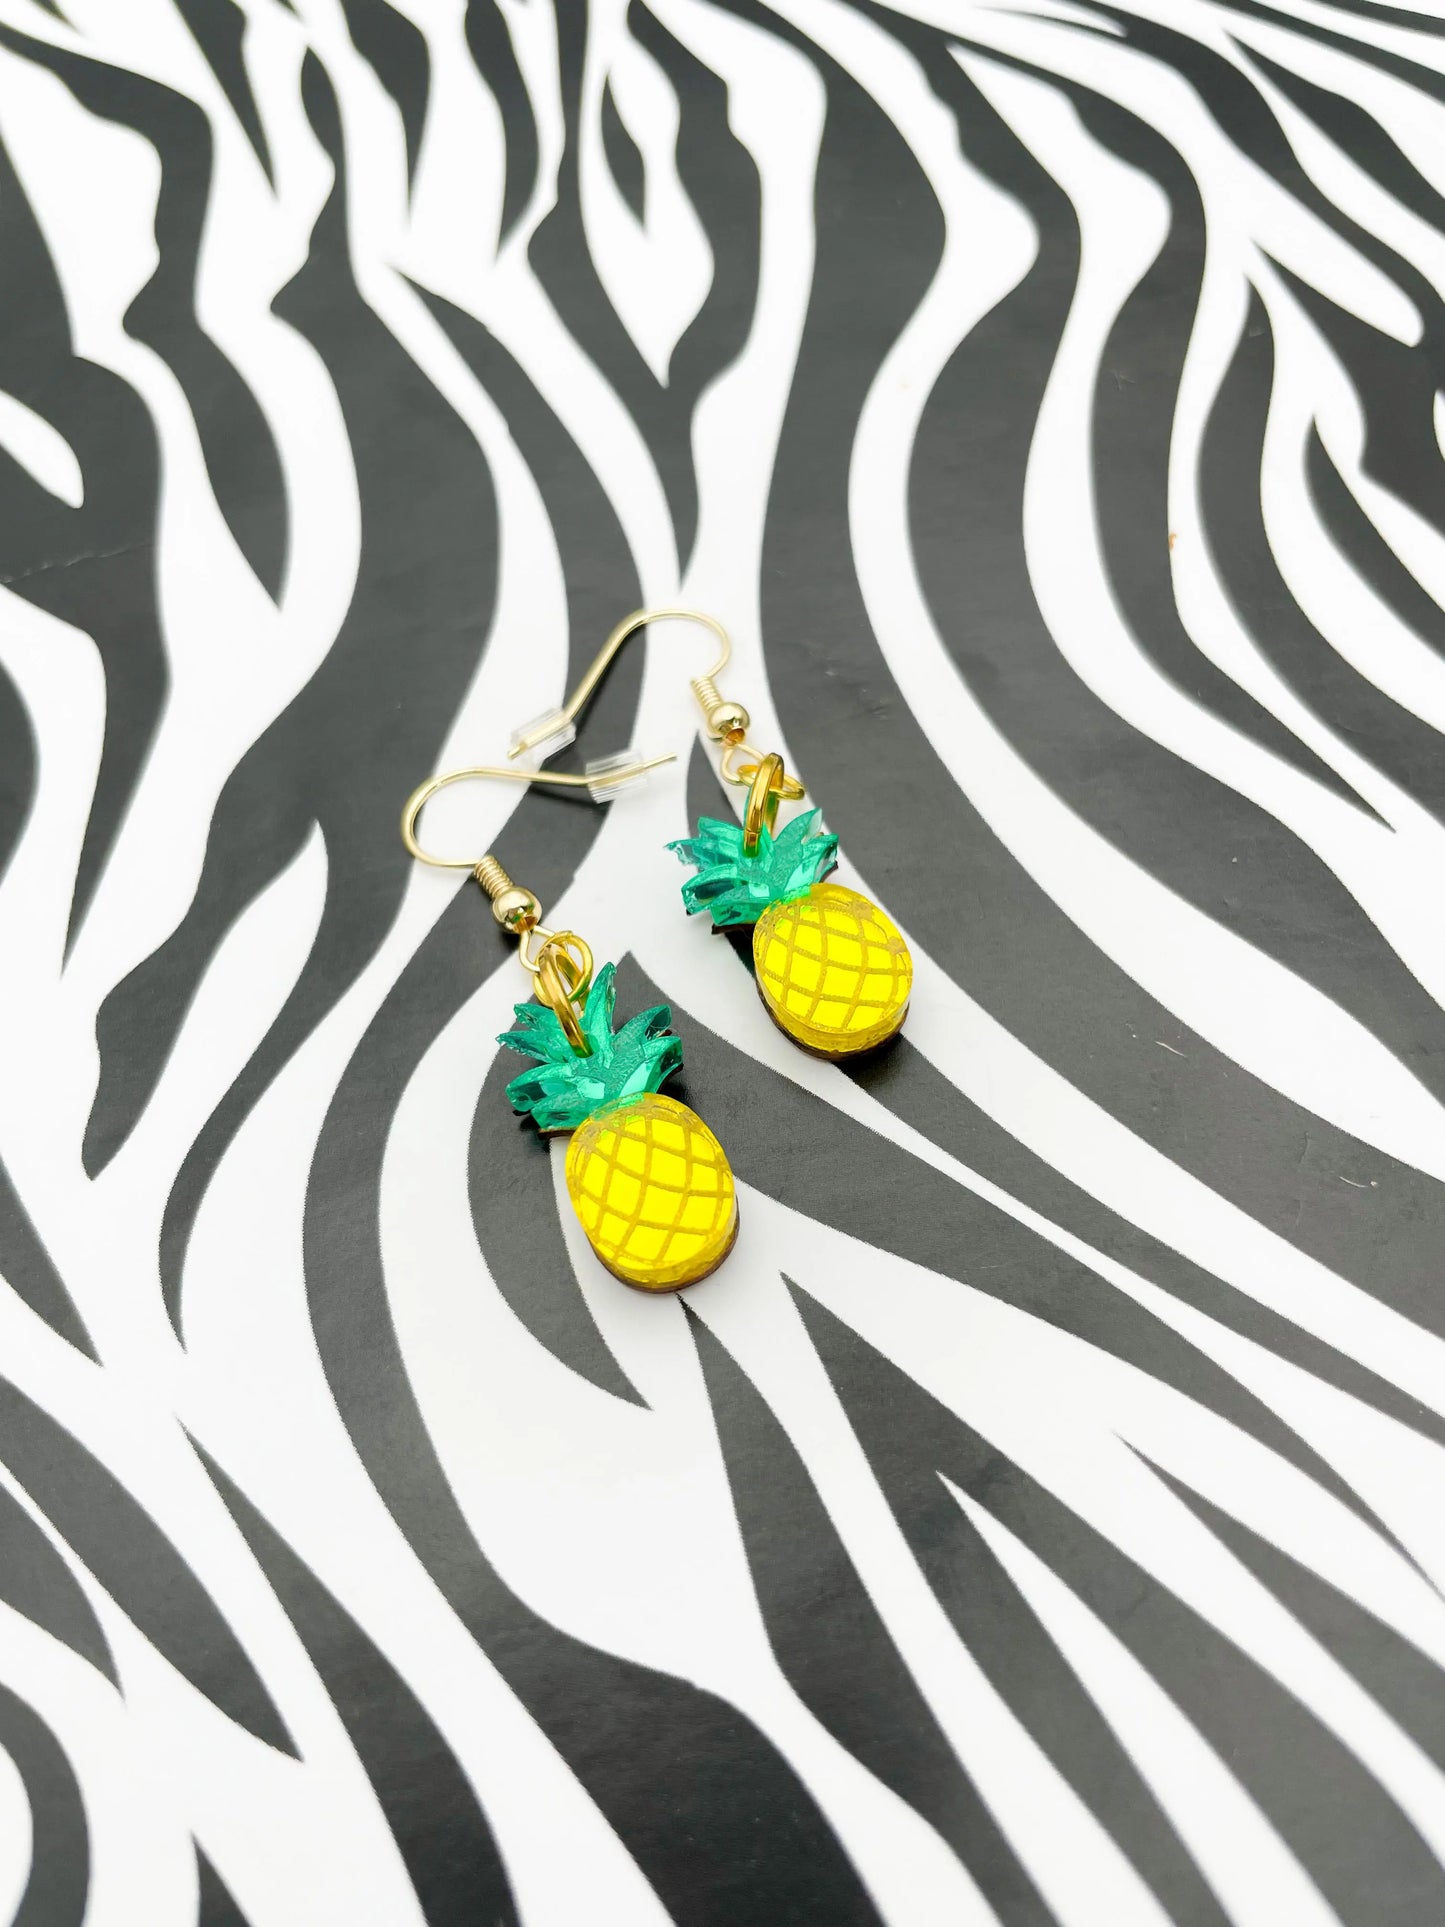 Medium Green and Yellow Acrylic Mirror Pineapple Dangle Earrings from Sapphire Frills